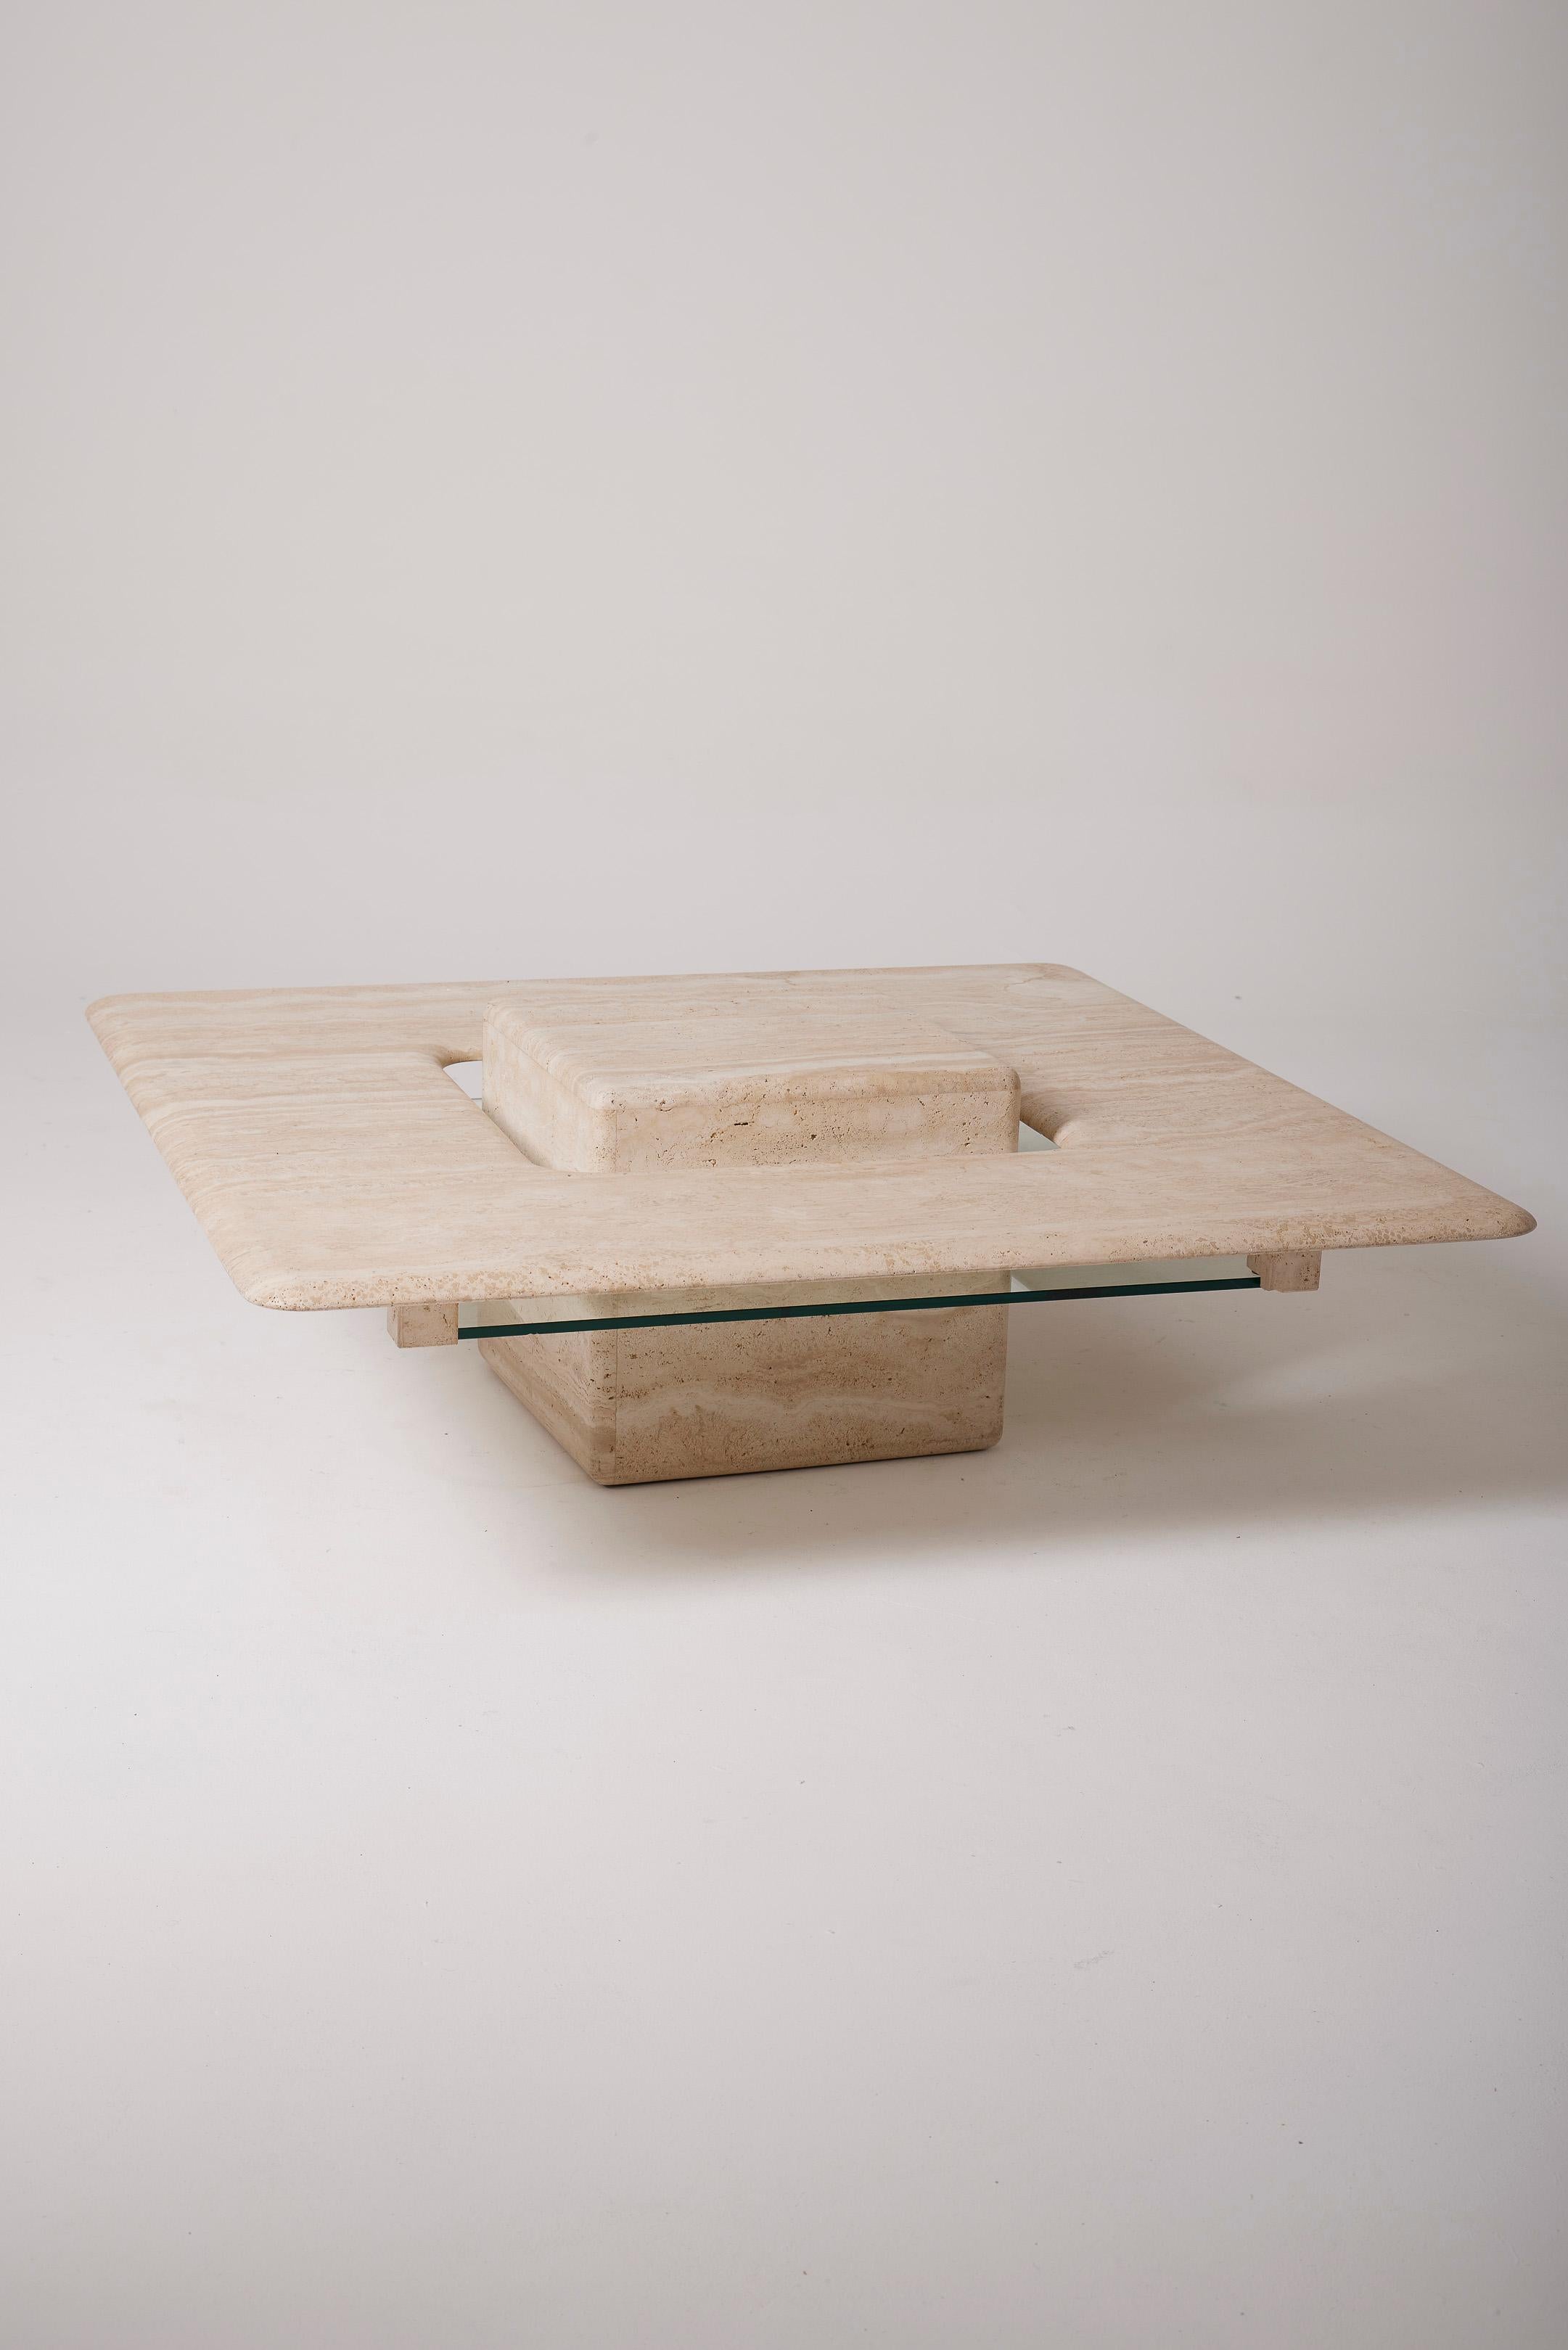 Square travertine and glass coffee table from the 1970s. Excellent condition.
LP3055